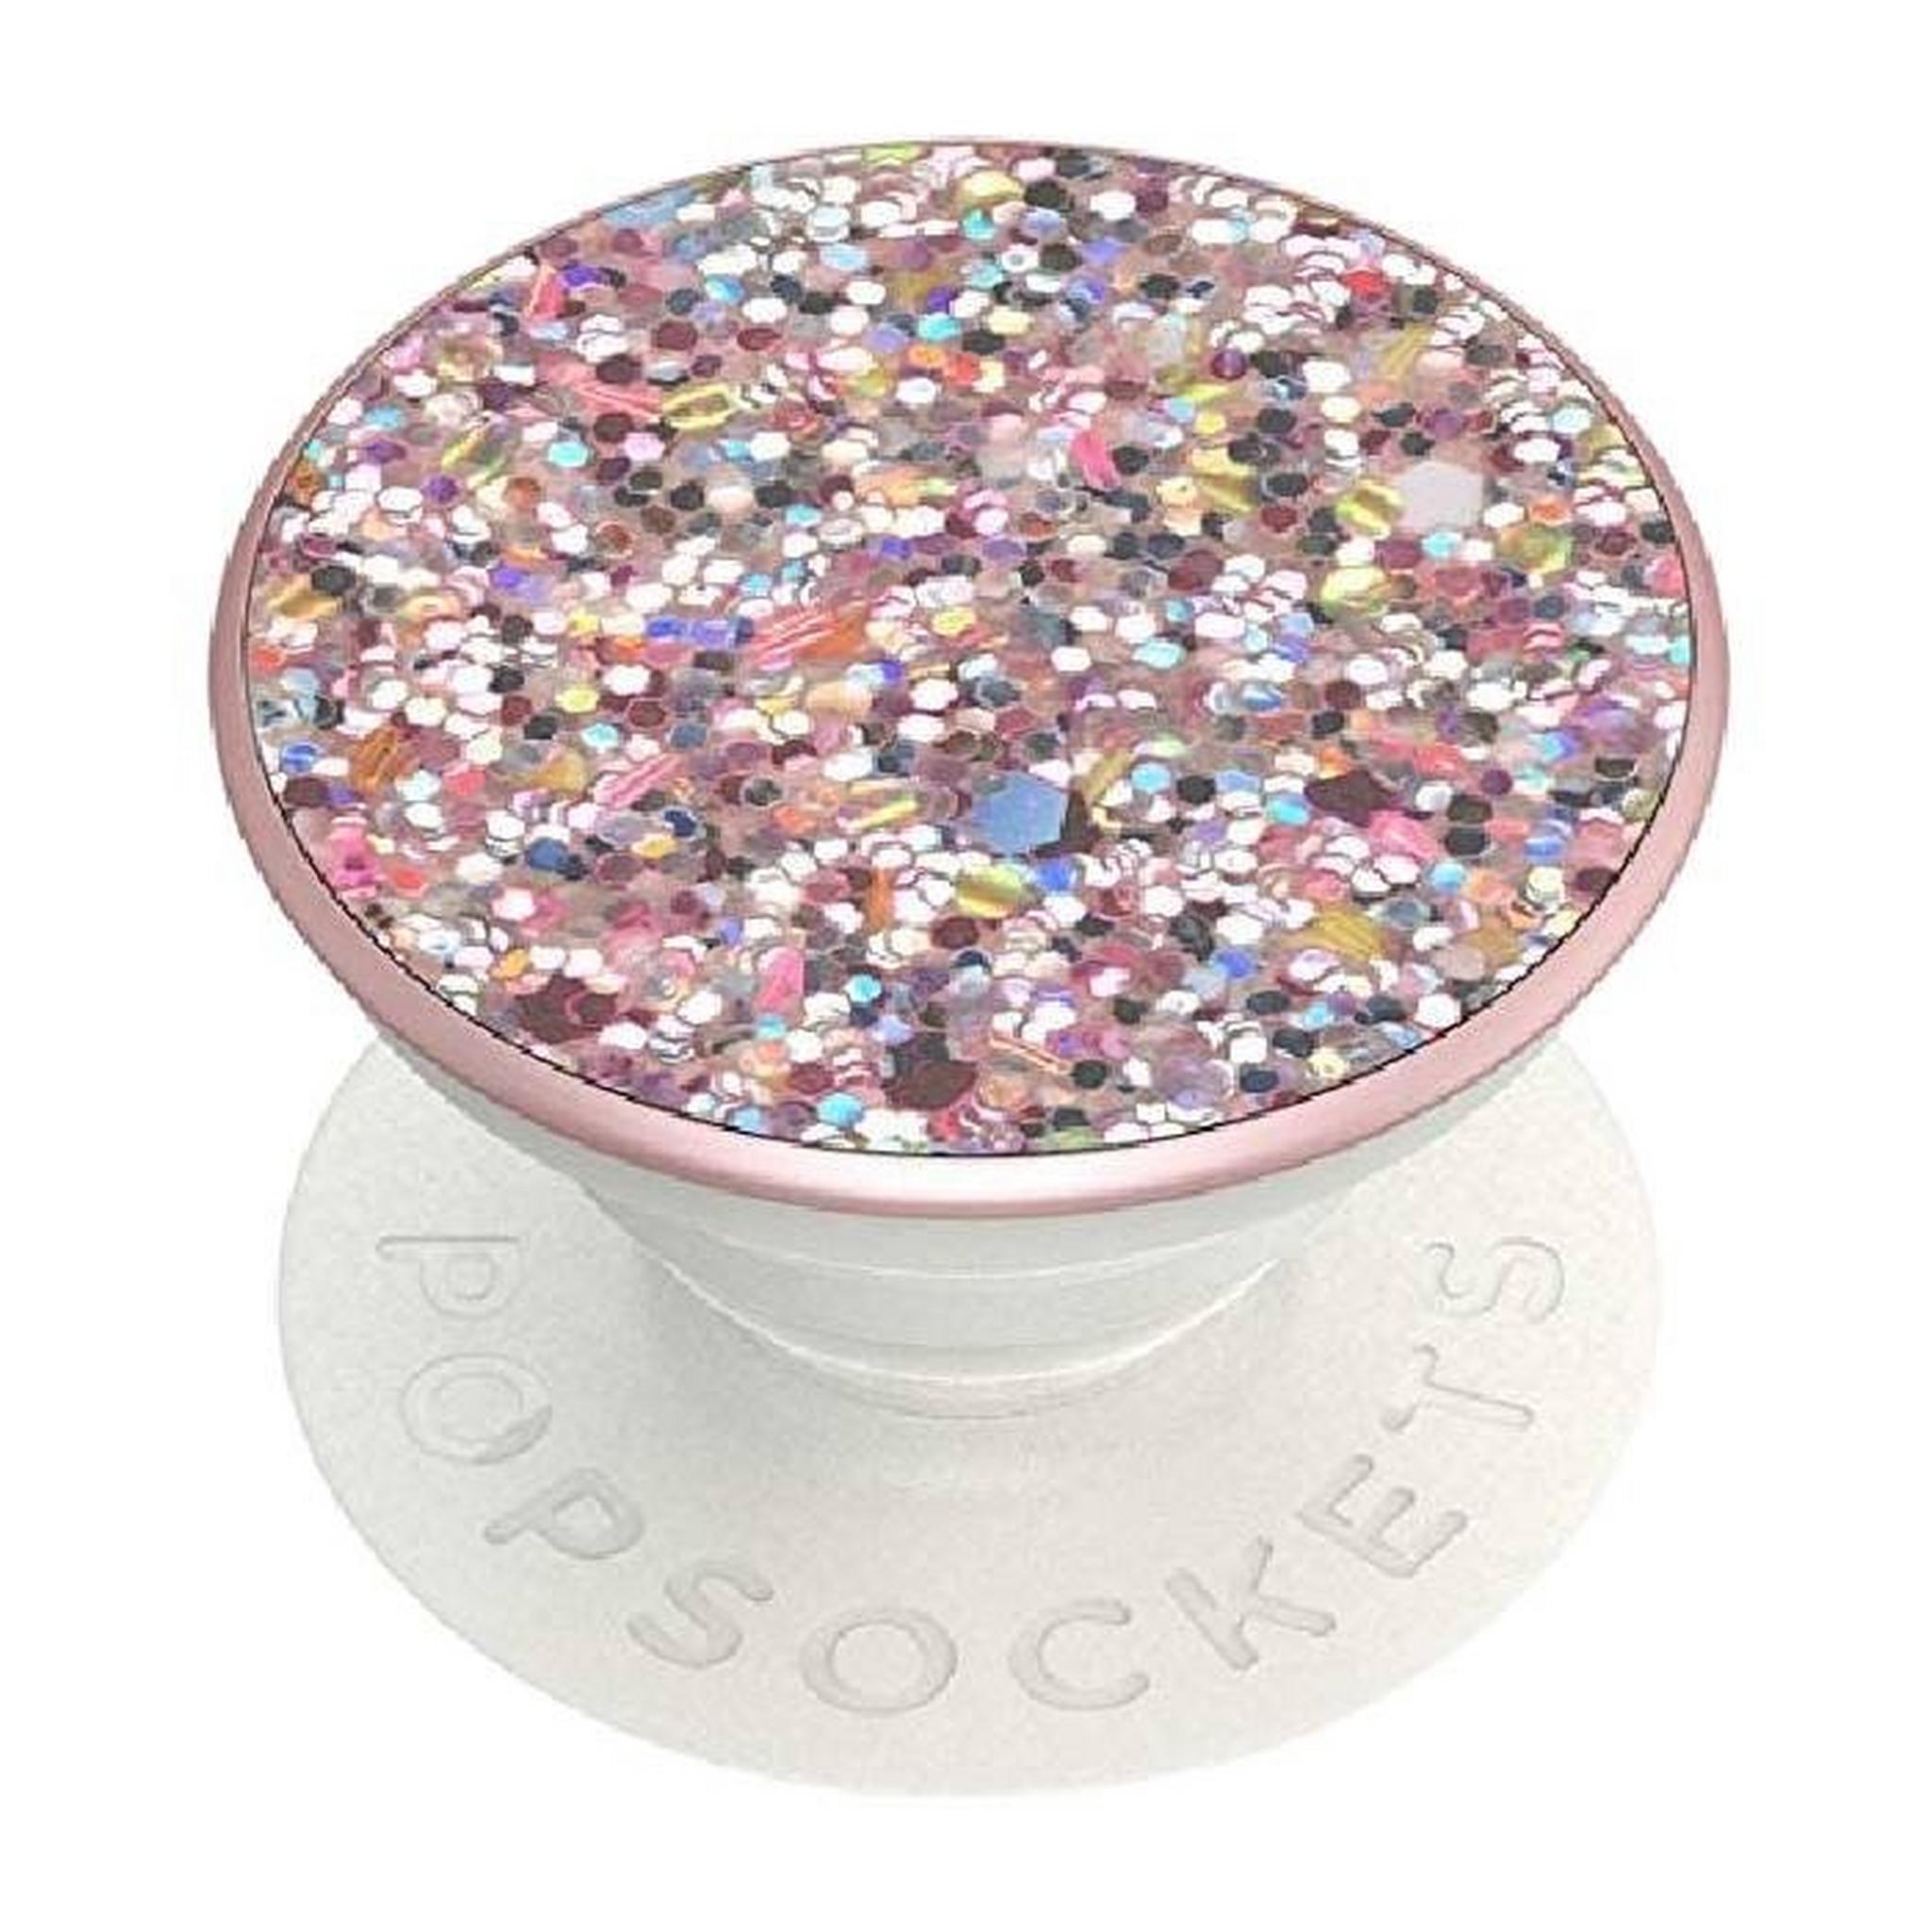 PopSockets Phone Stand and Grip (802443) – Sparkle Rosebud